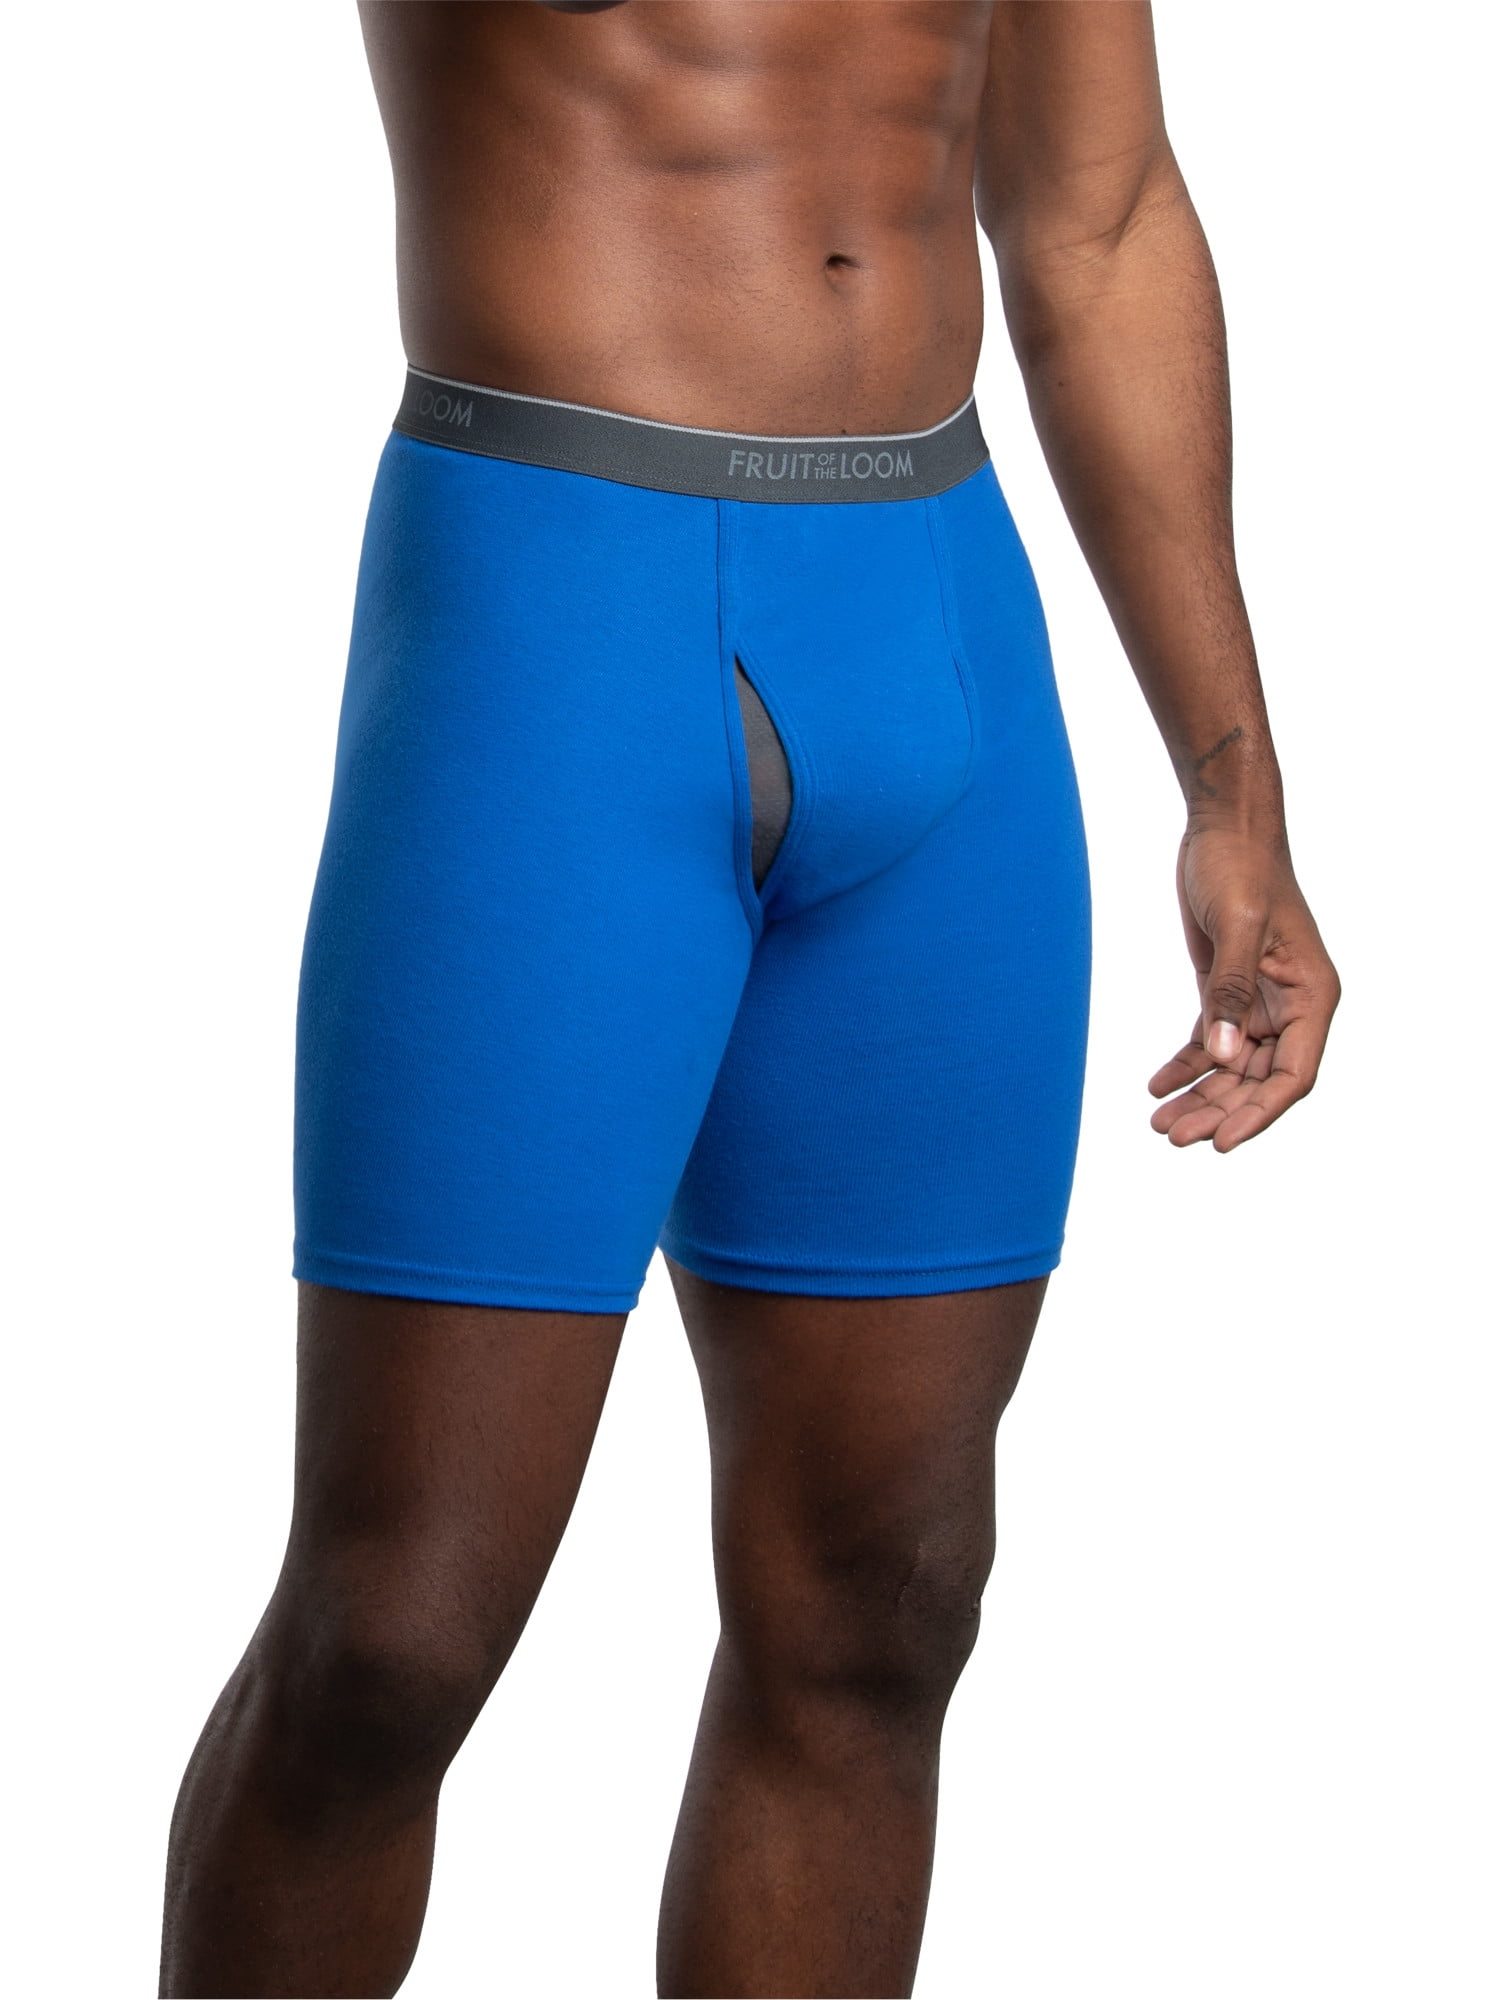 Fruit of the Loom Men's 4pk Coolzone Boxer Briefs - Colors May Vary XXL 4  ct